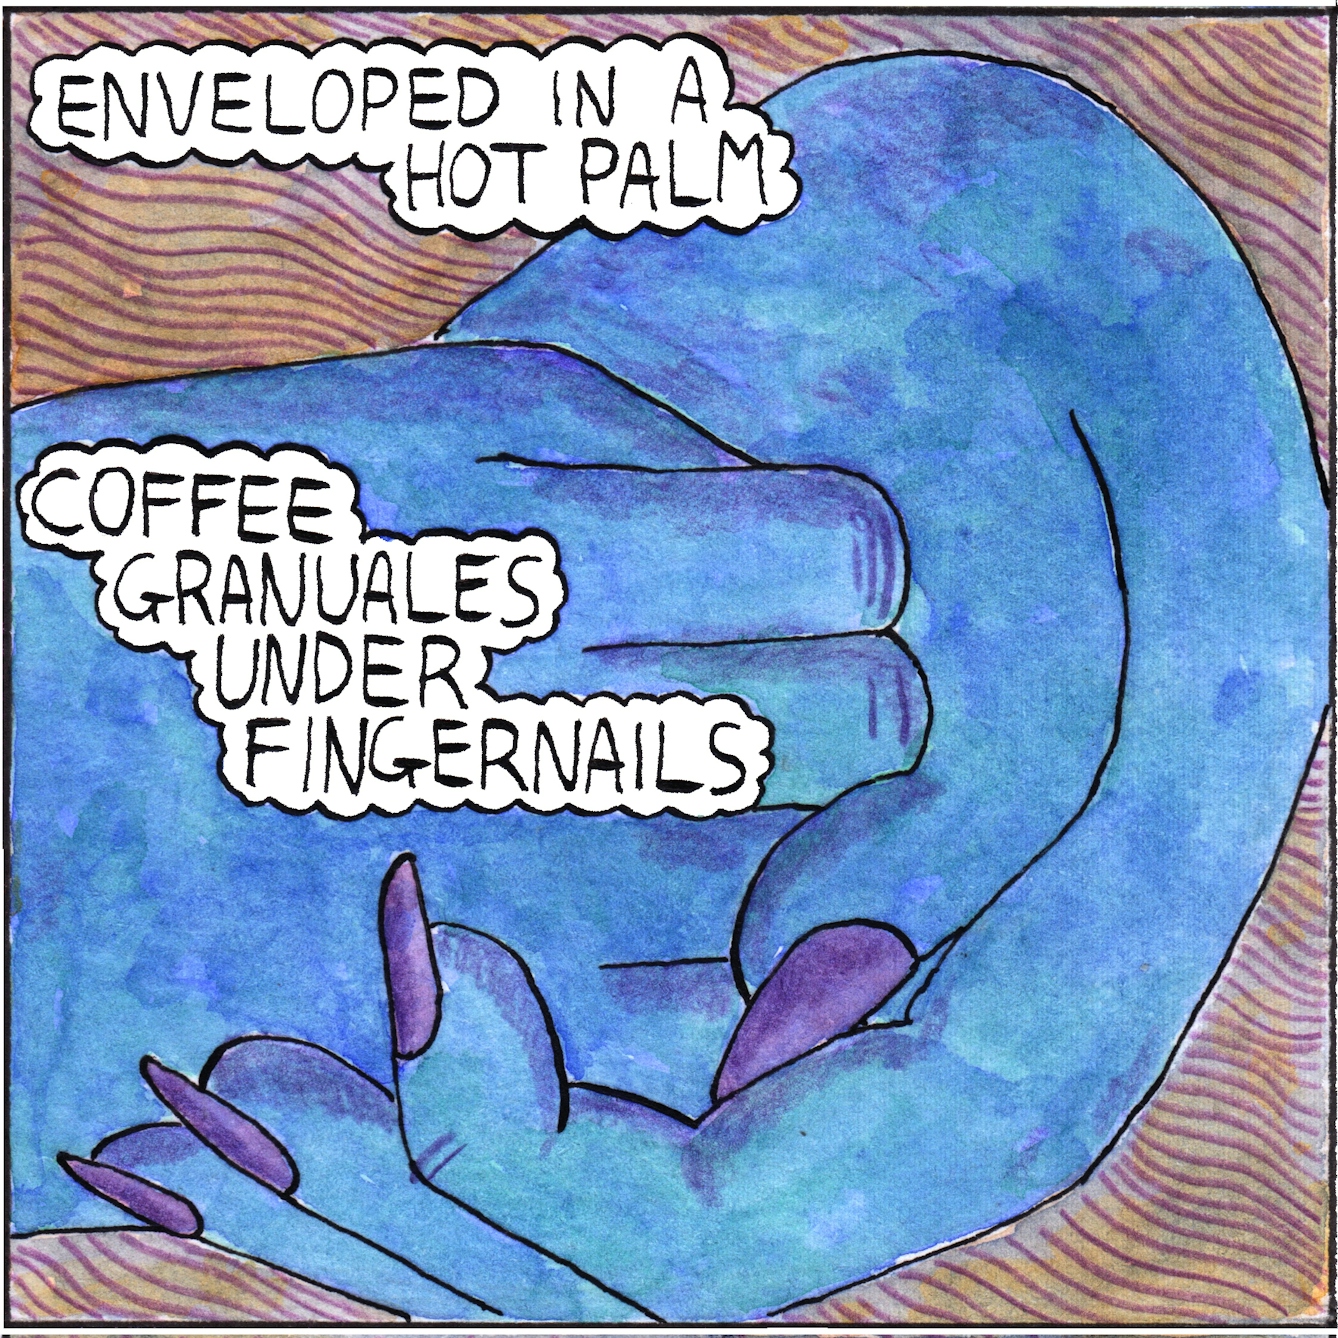 Panel 4 of the web comic 'Nutmeg': Two blue hands enclosed around each other fill most of the panel. Text bubbles read “Enveloped in a hot palm. Coffee granules under fingernails”. 